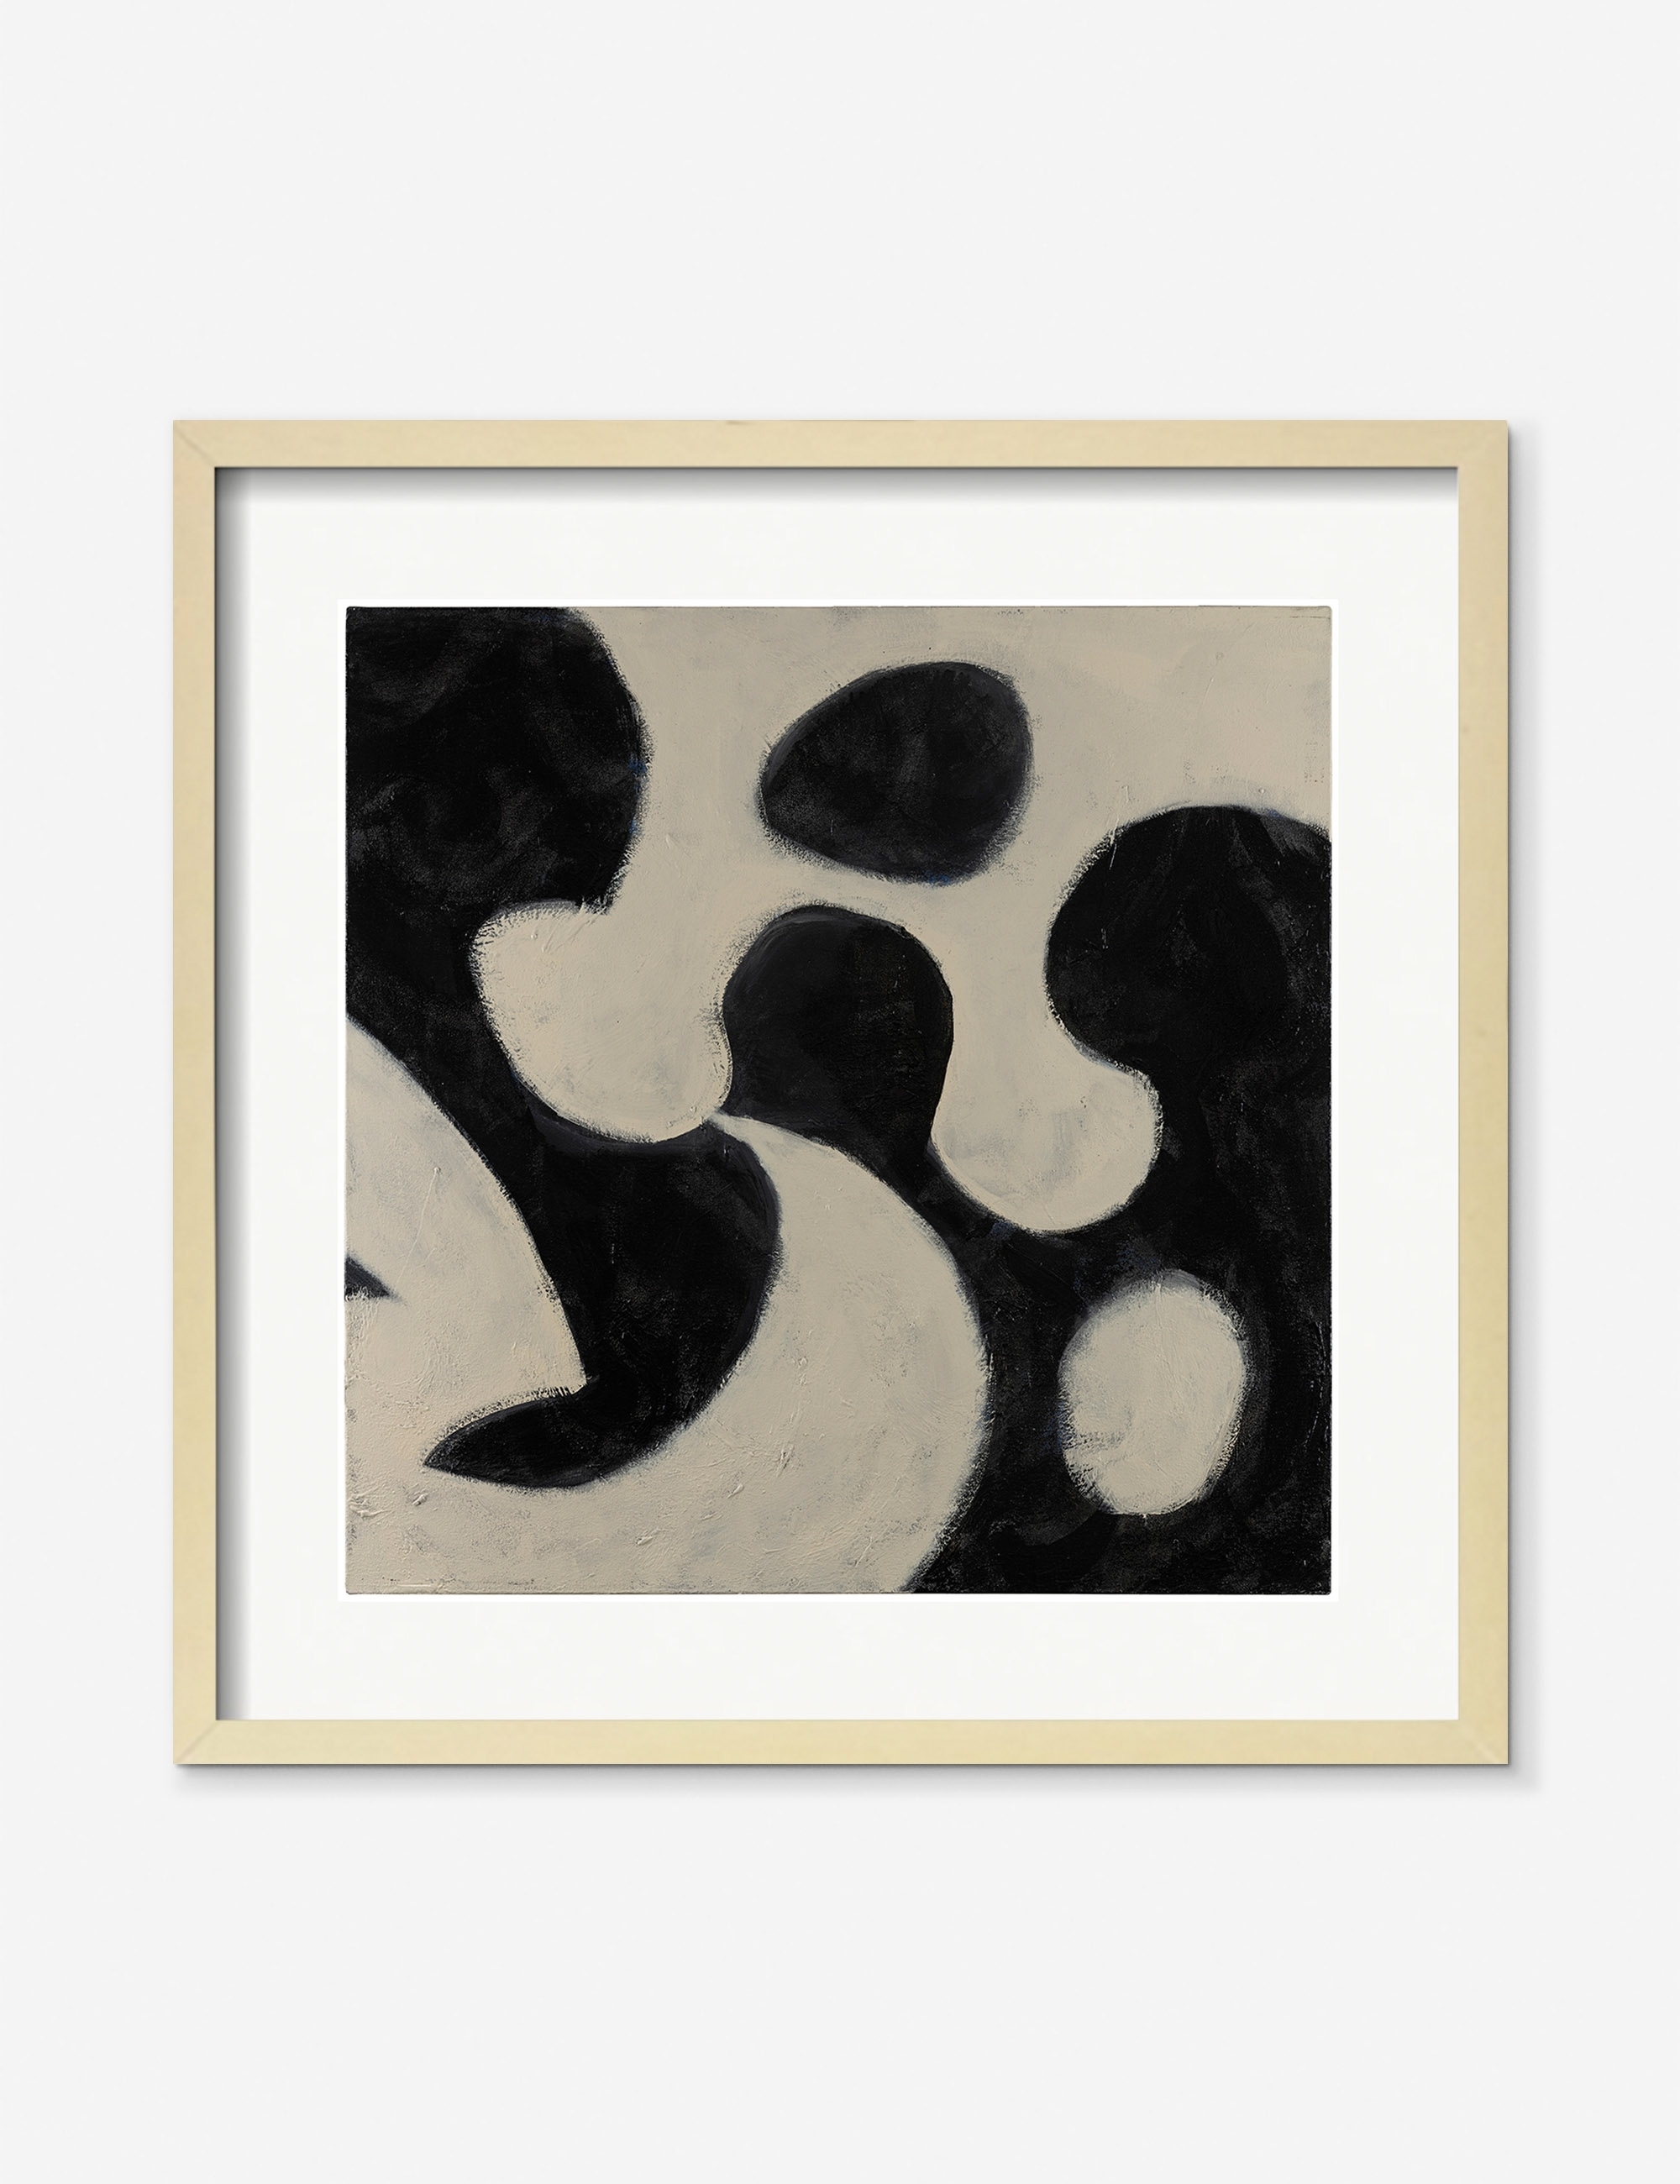 Shapes 2 Print by Francis Poirot - Image 1